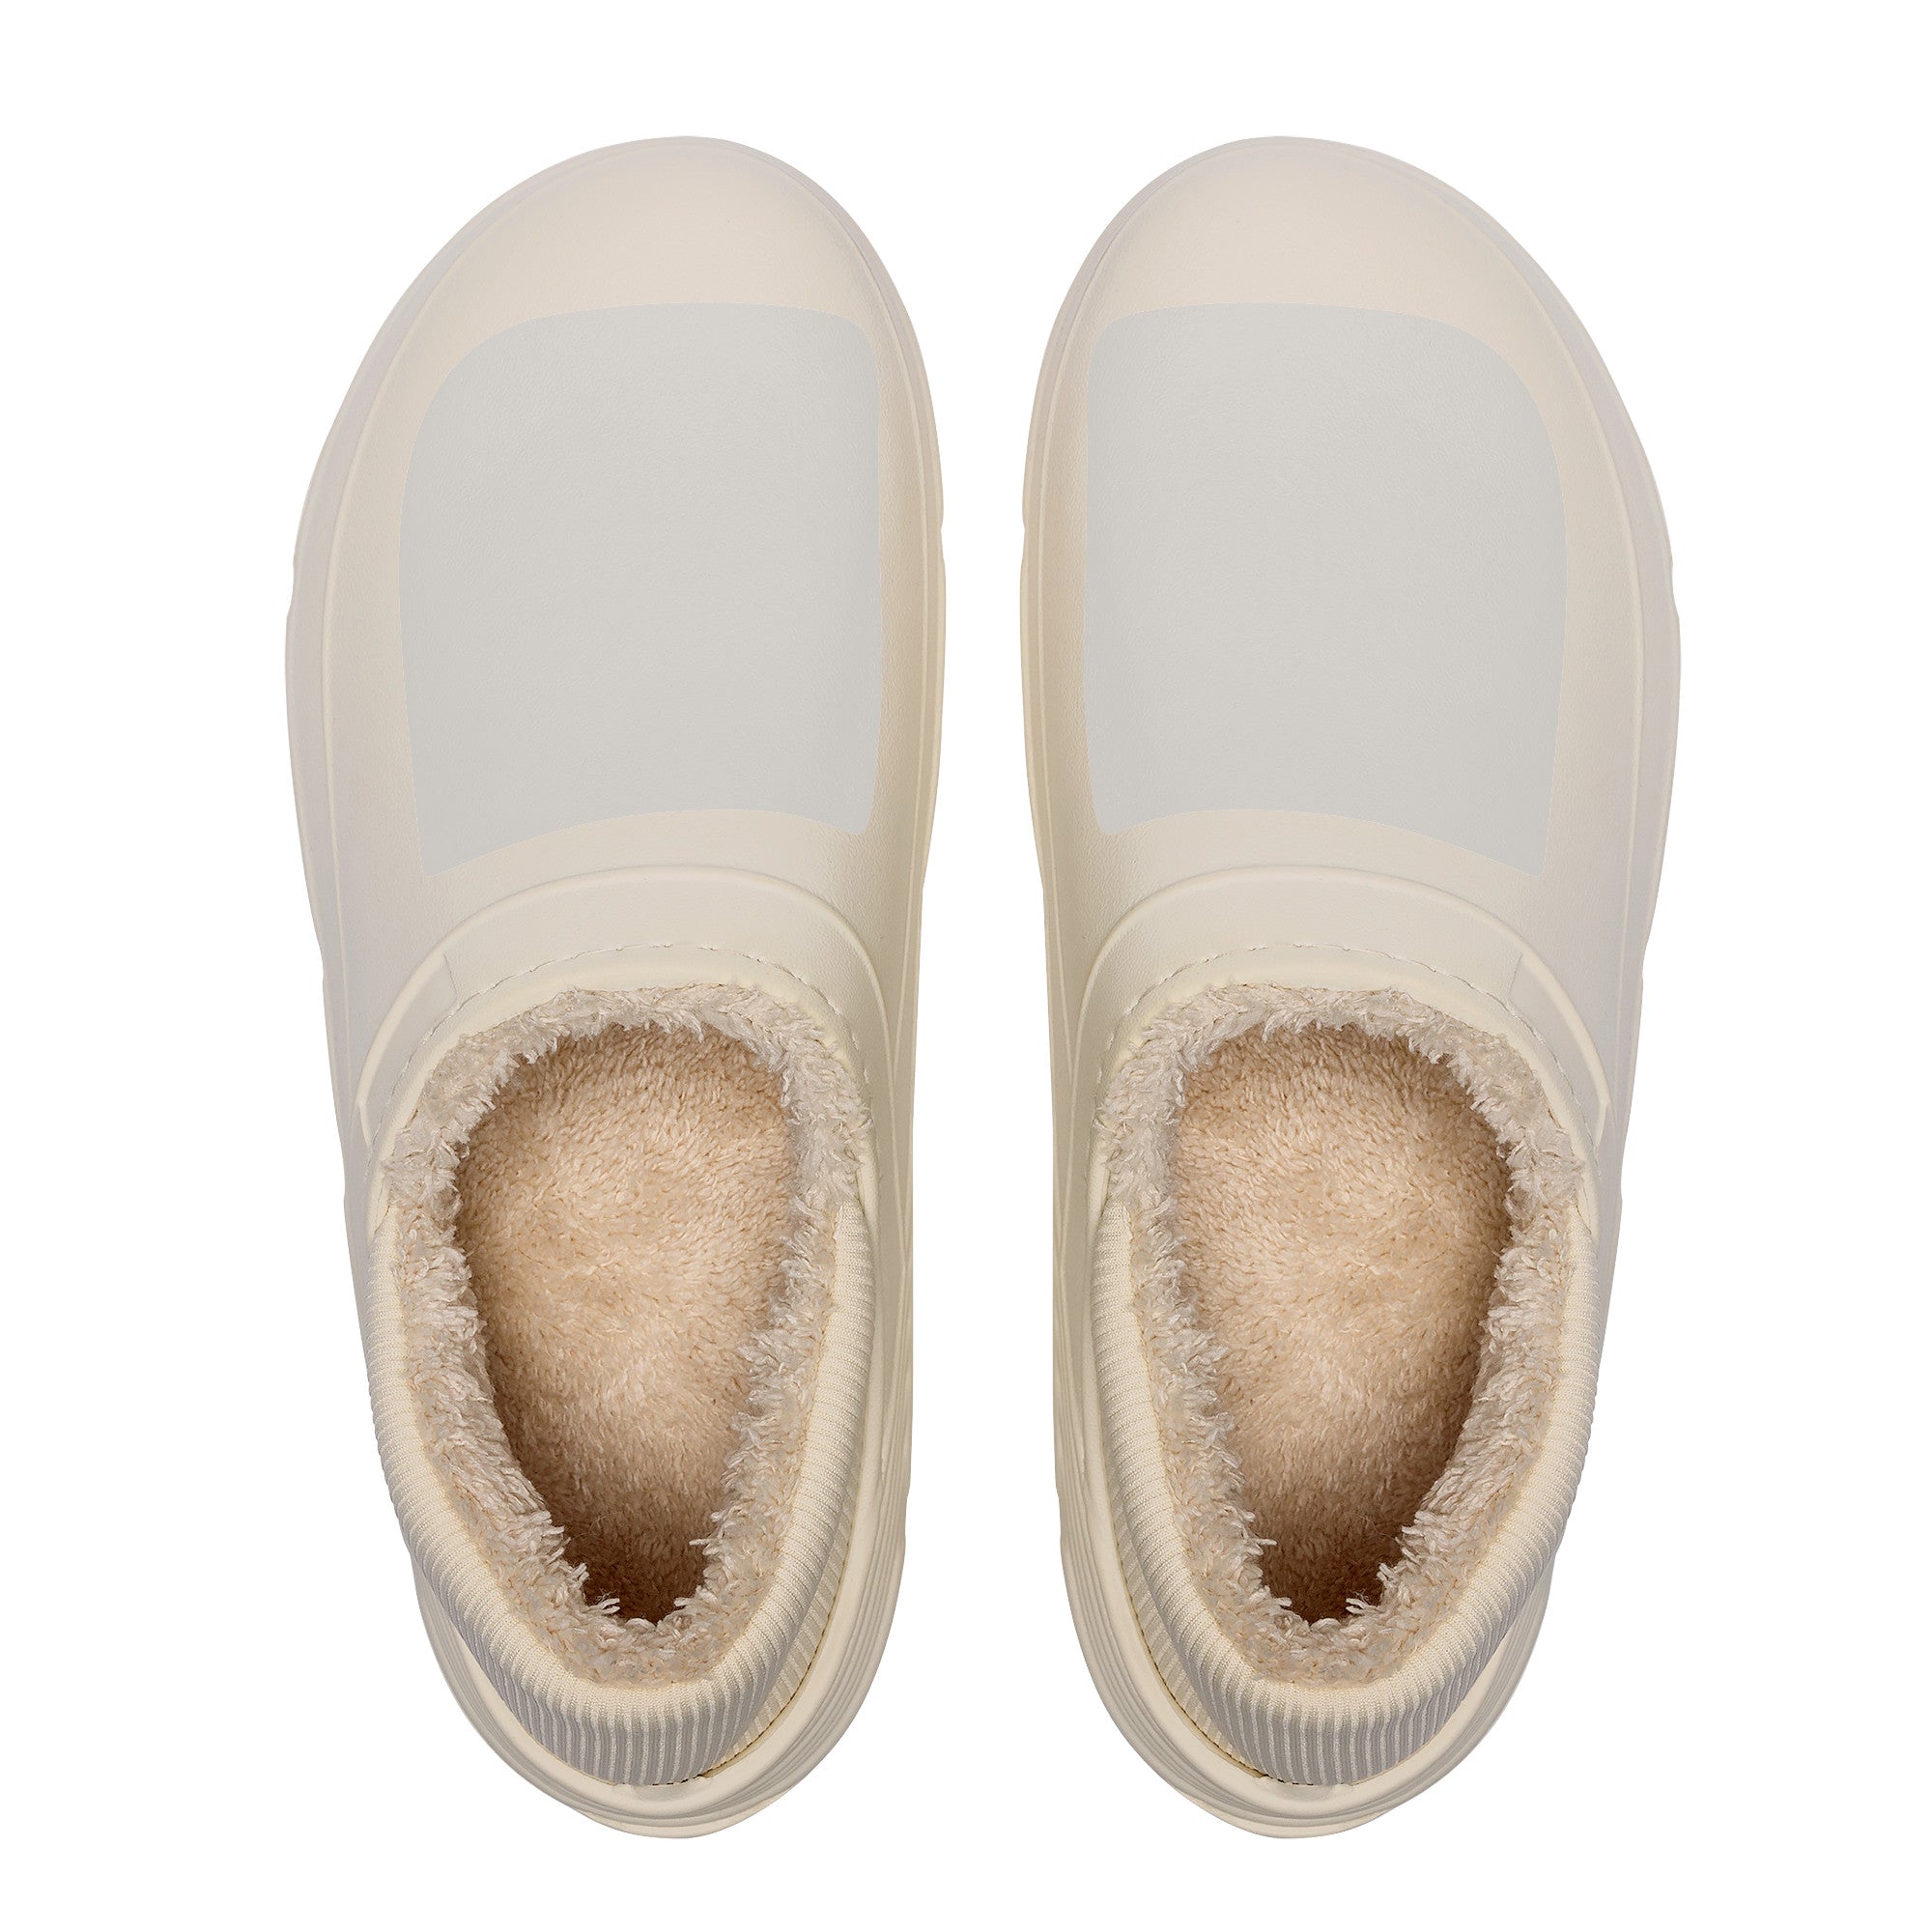 Customizable Warm Cotton Slippers | Design Slippers by Adding Images, Logos, or Patterns to the Front of The Shoe - Shoe Zero